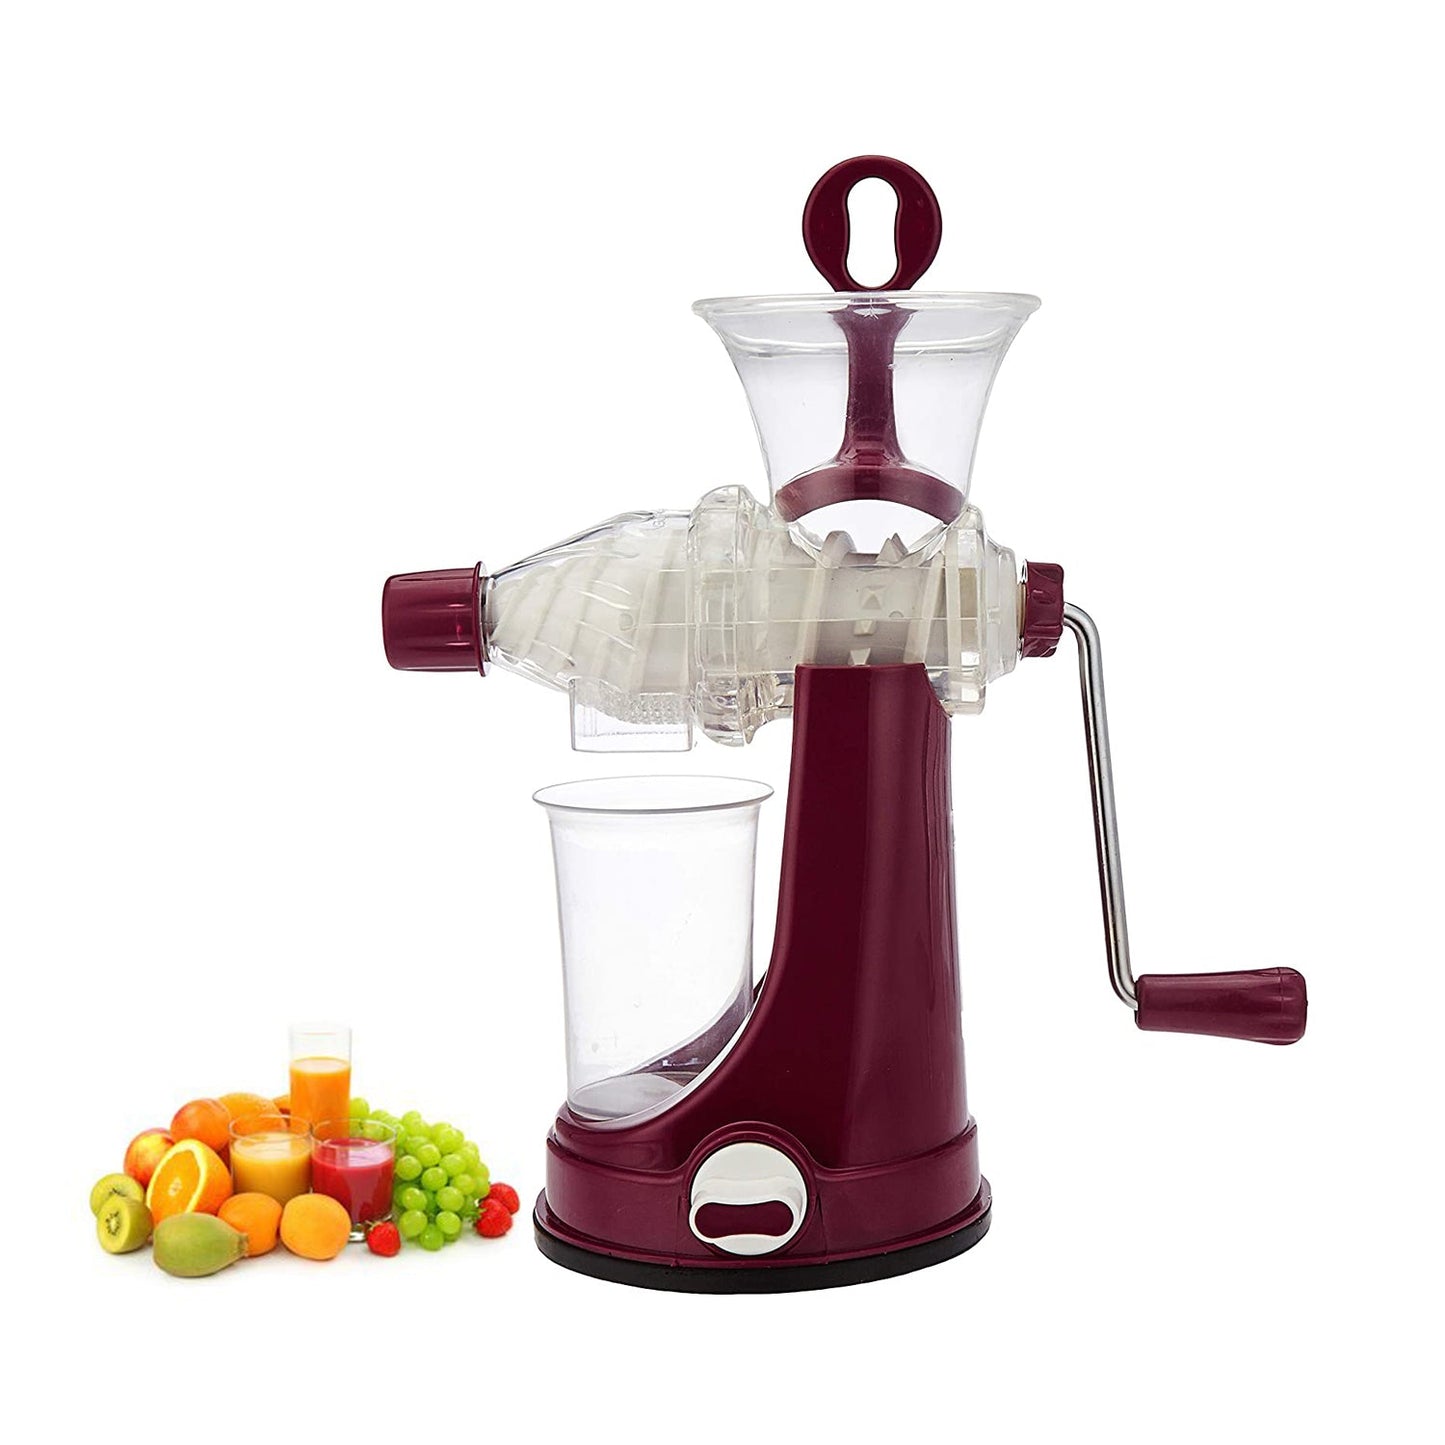 7017B ABS Juicer N Blender used widely in all kinds of household kitchen purposes for making and blending fruit juices and beverages. DeoDap